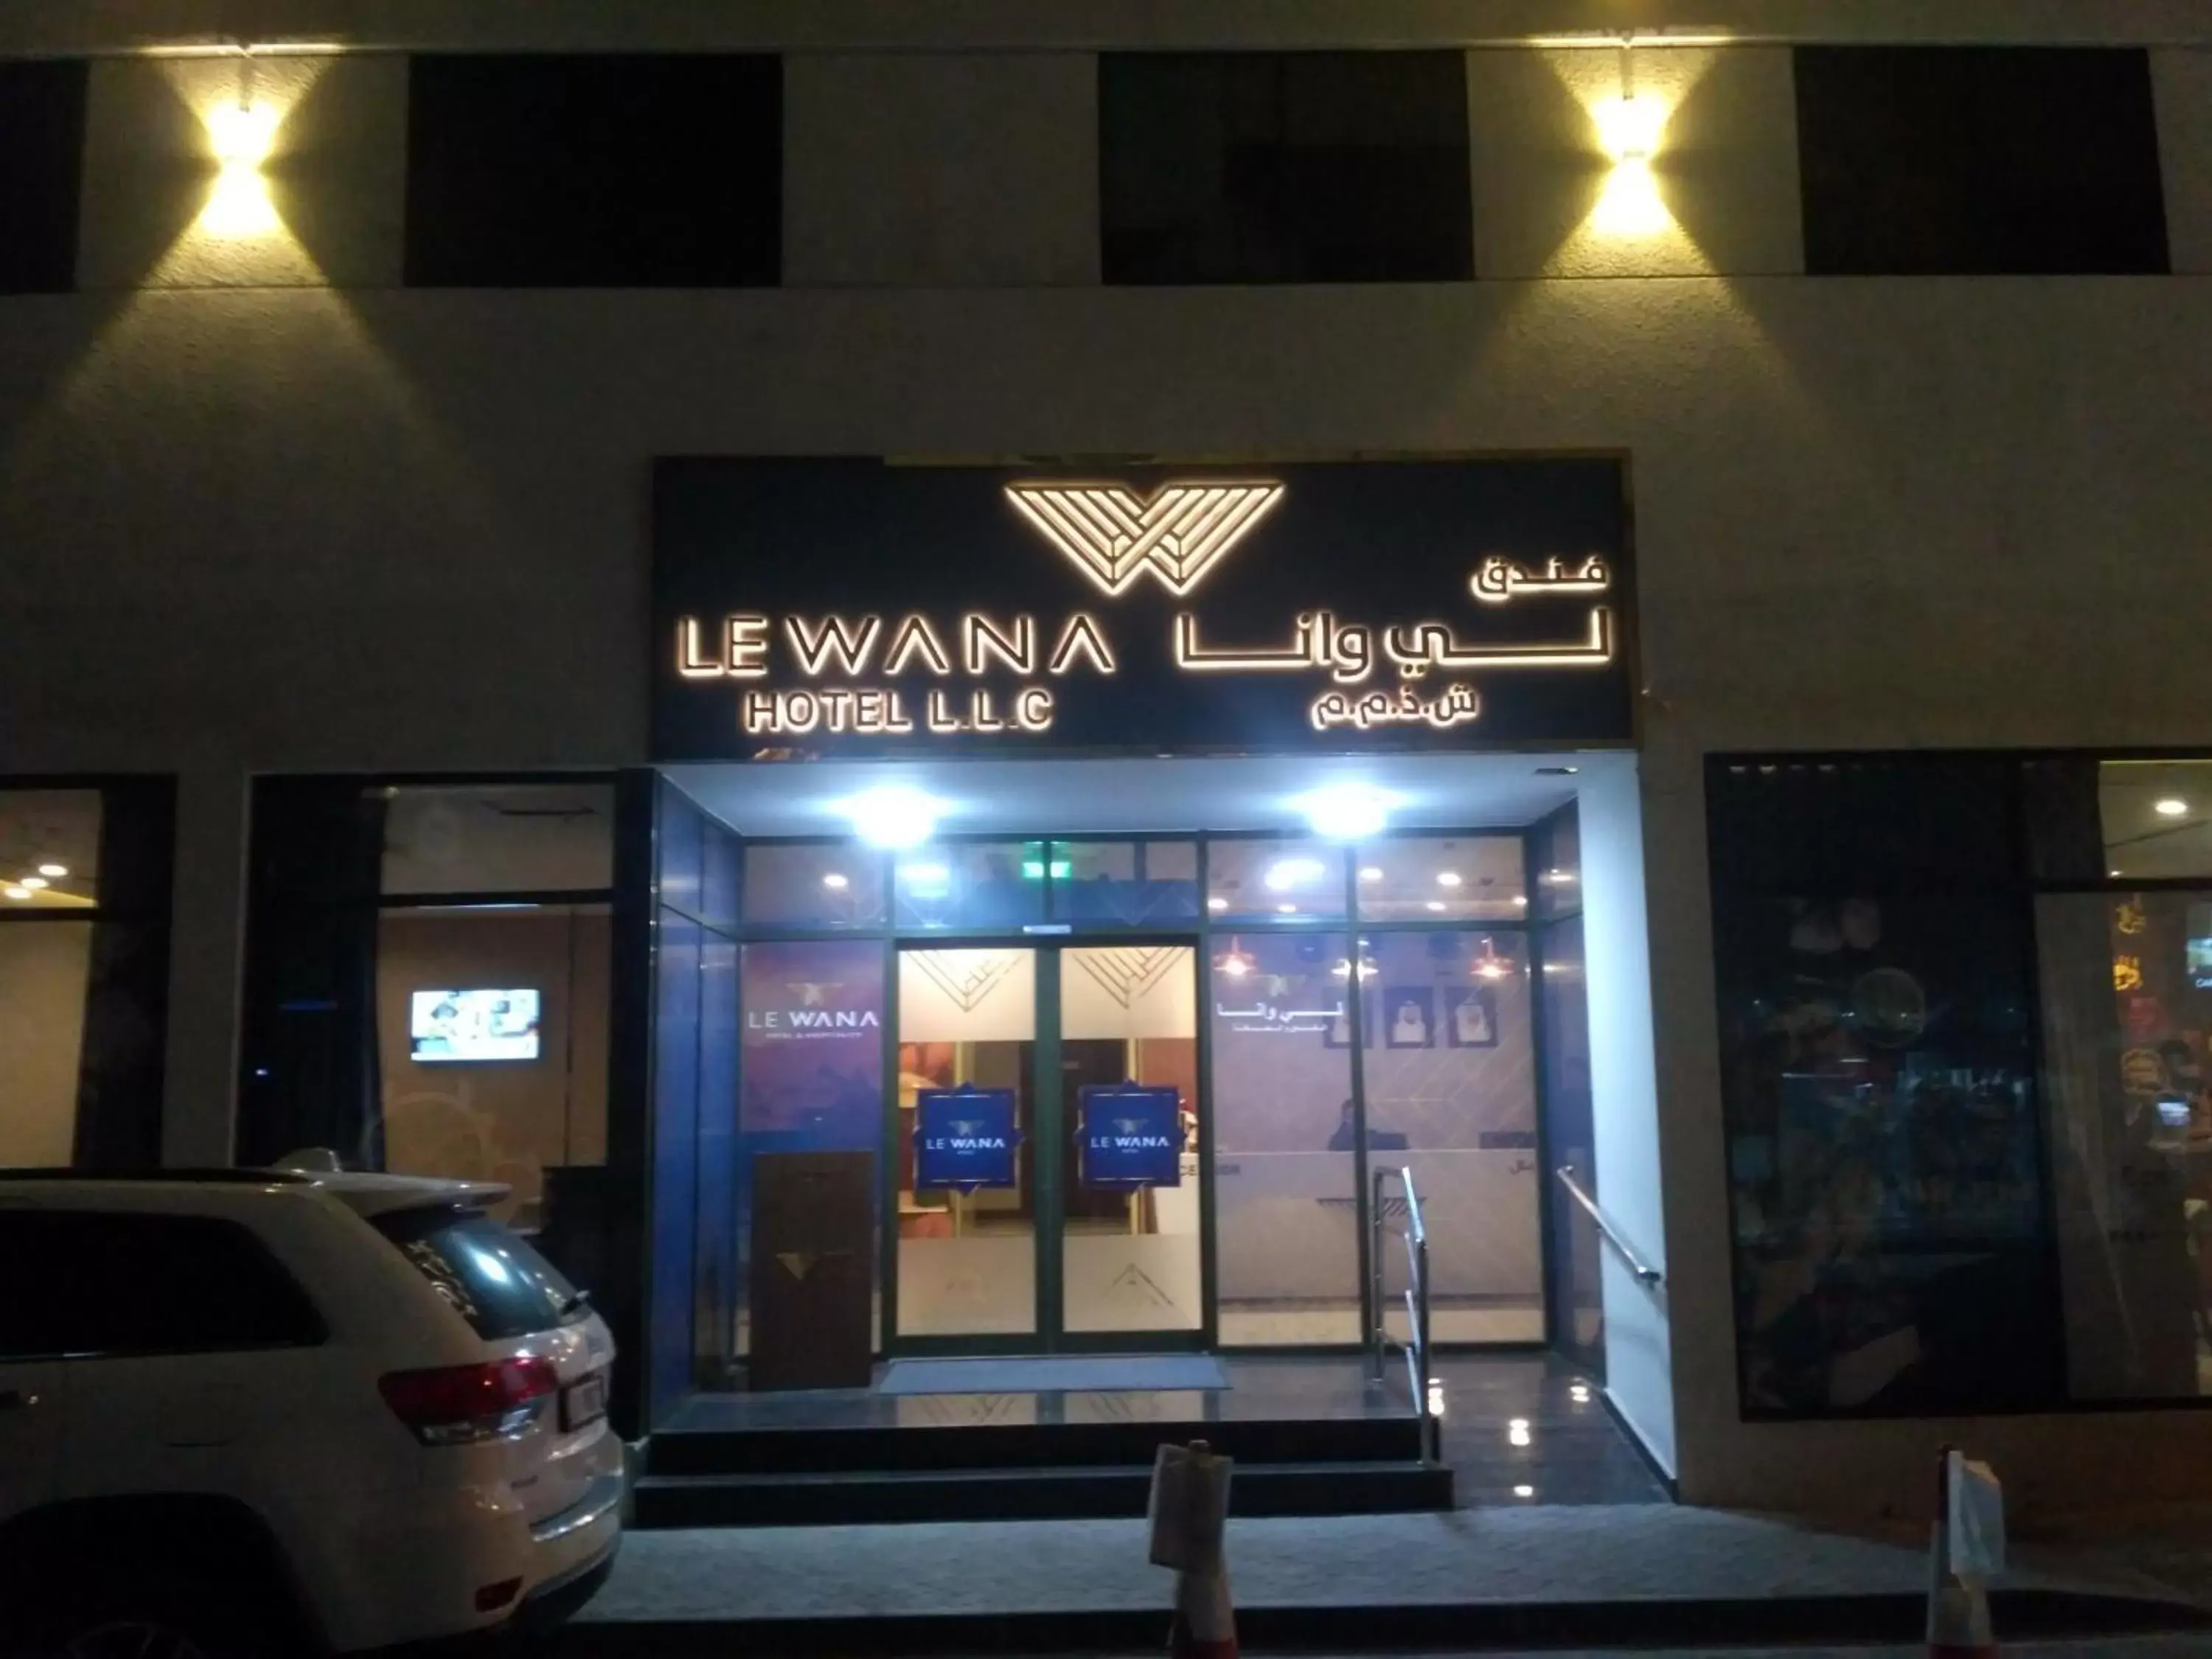 Property building in Le Wana Hotel